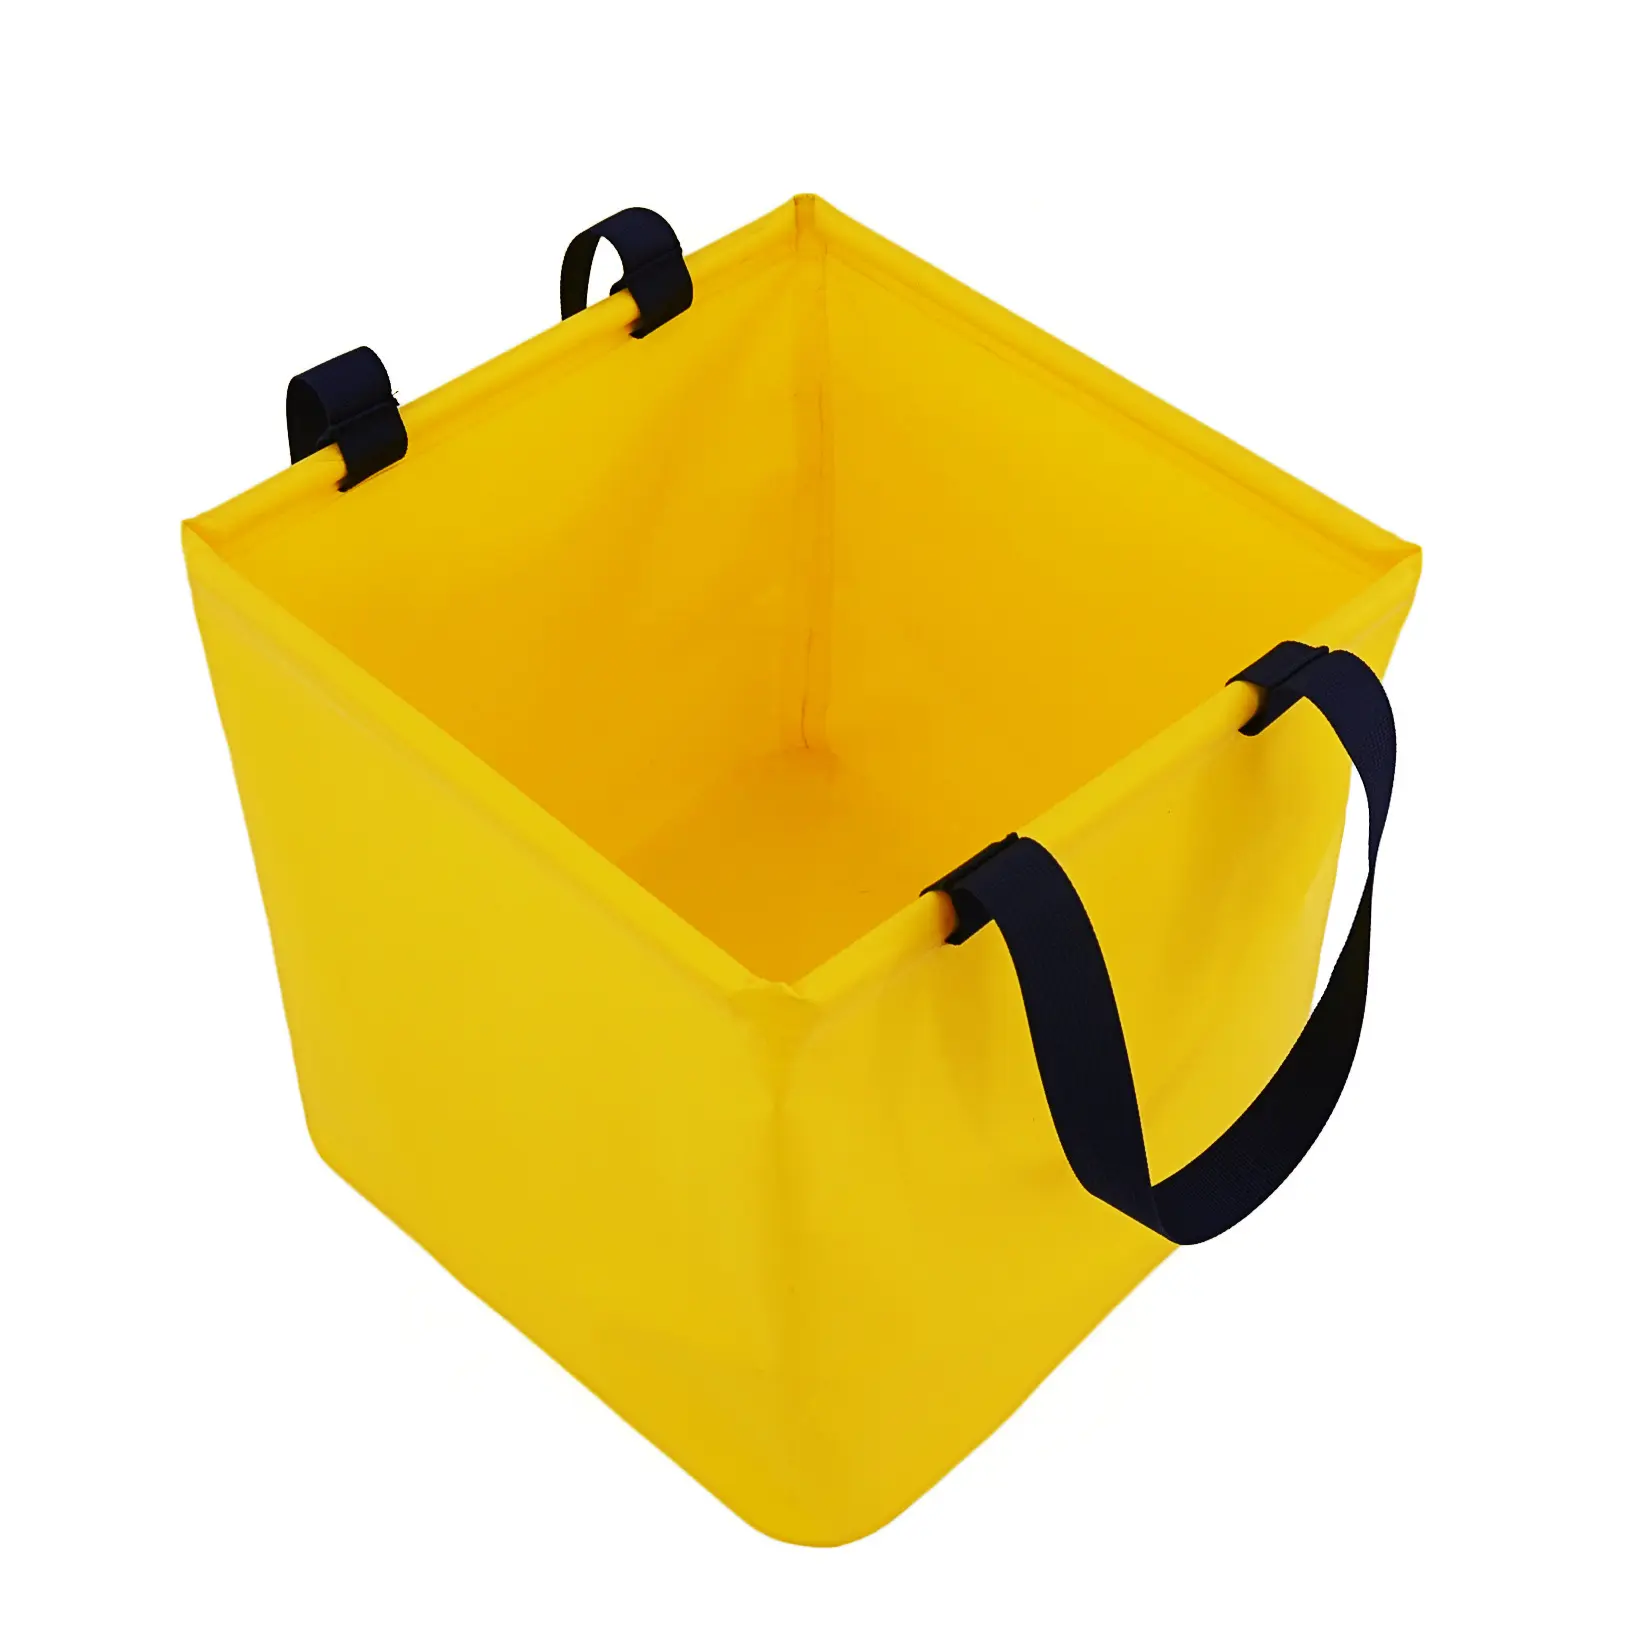 PVC mesh waterproof bag for outdoor camping storage, folding bucket, square, and various color tote bags